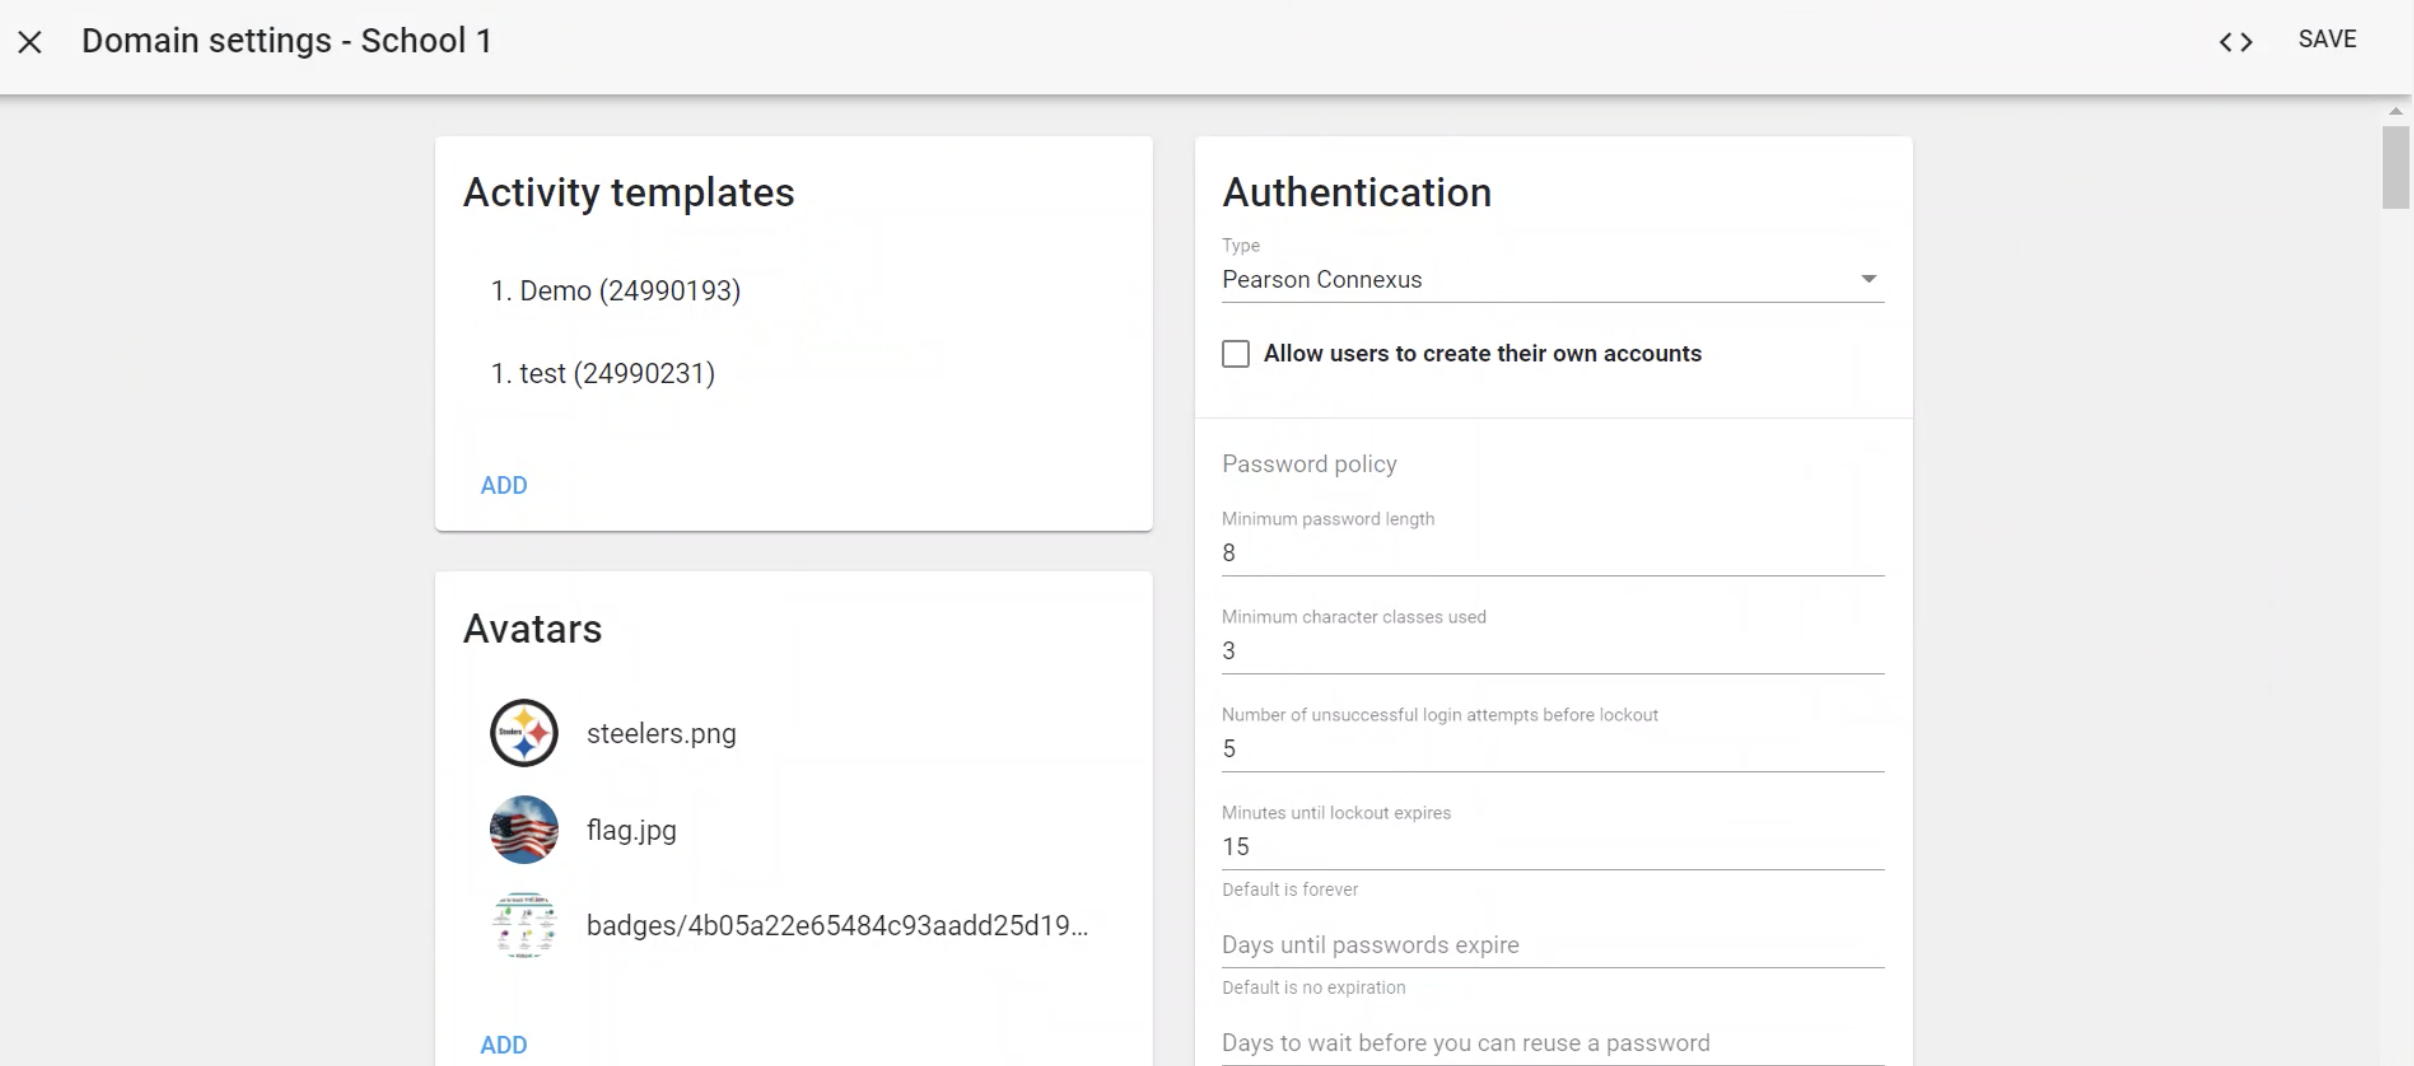 activity templates, avatars, and authentication cards display in the settings screen